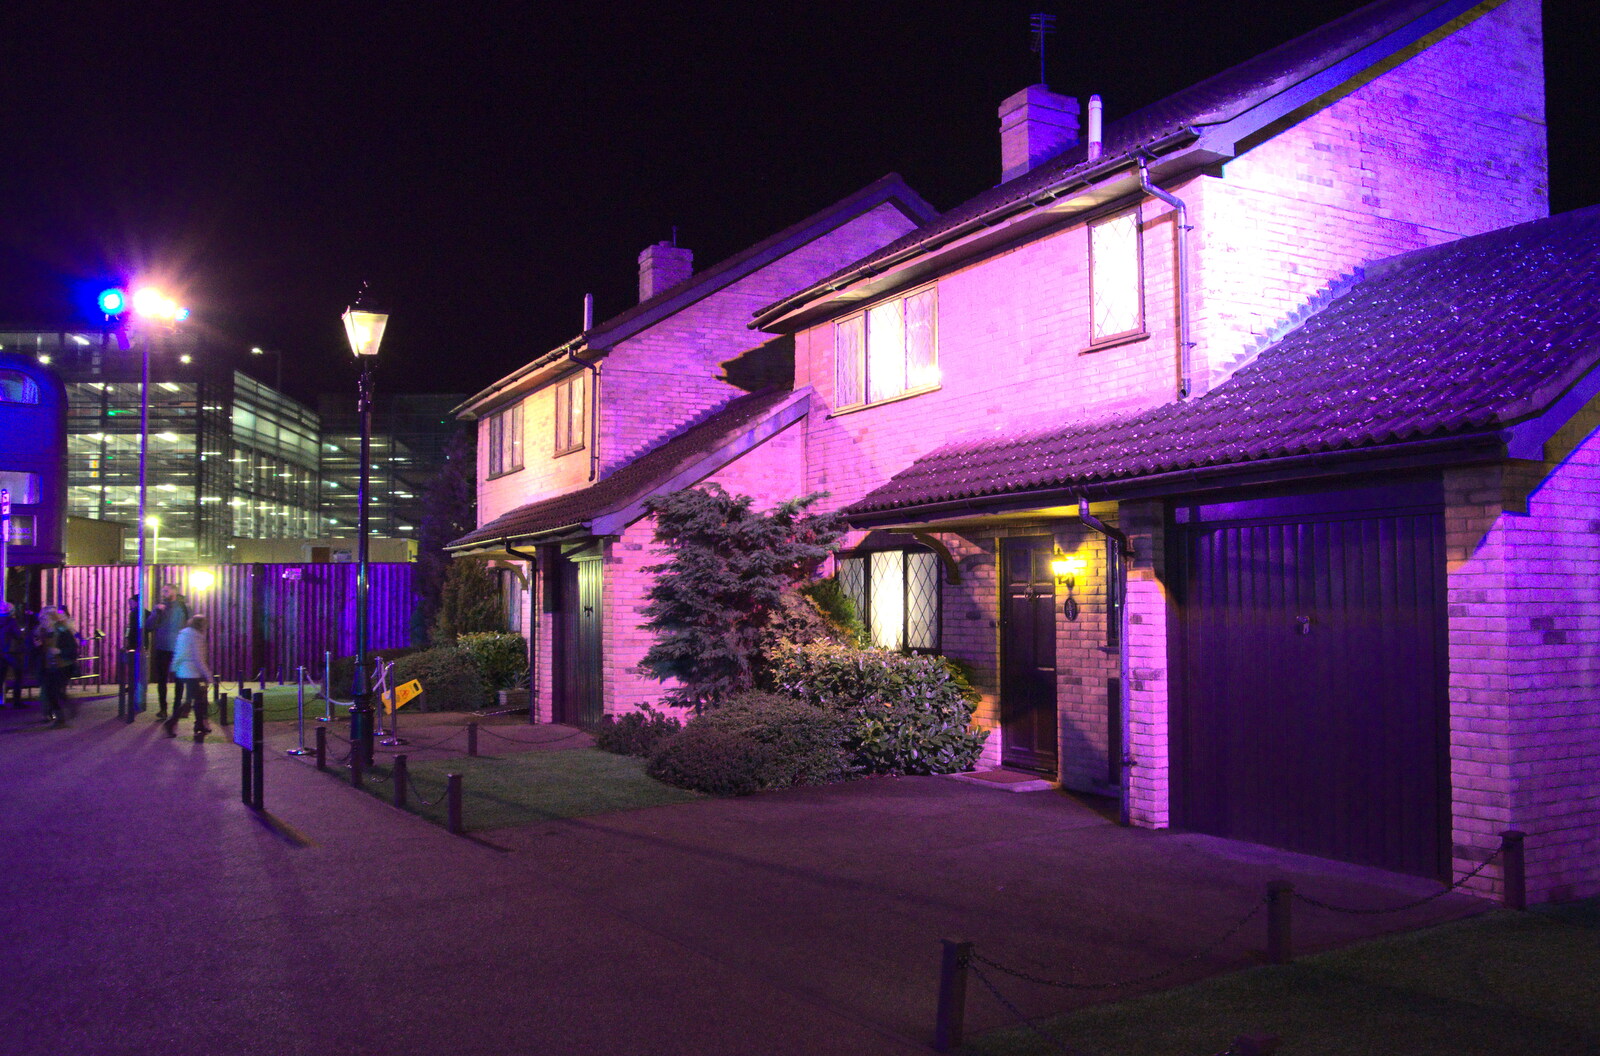 4 Privet Drive, and next door from A Trip to Harry Potter World, Leavesden, Hertfordshire - 16th February 2020